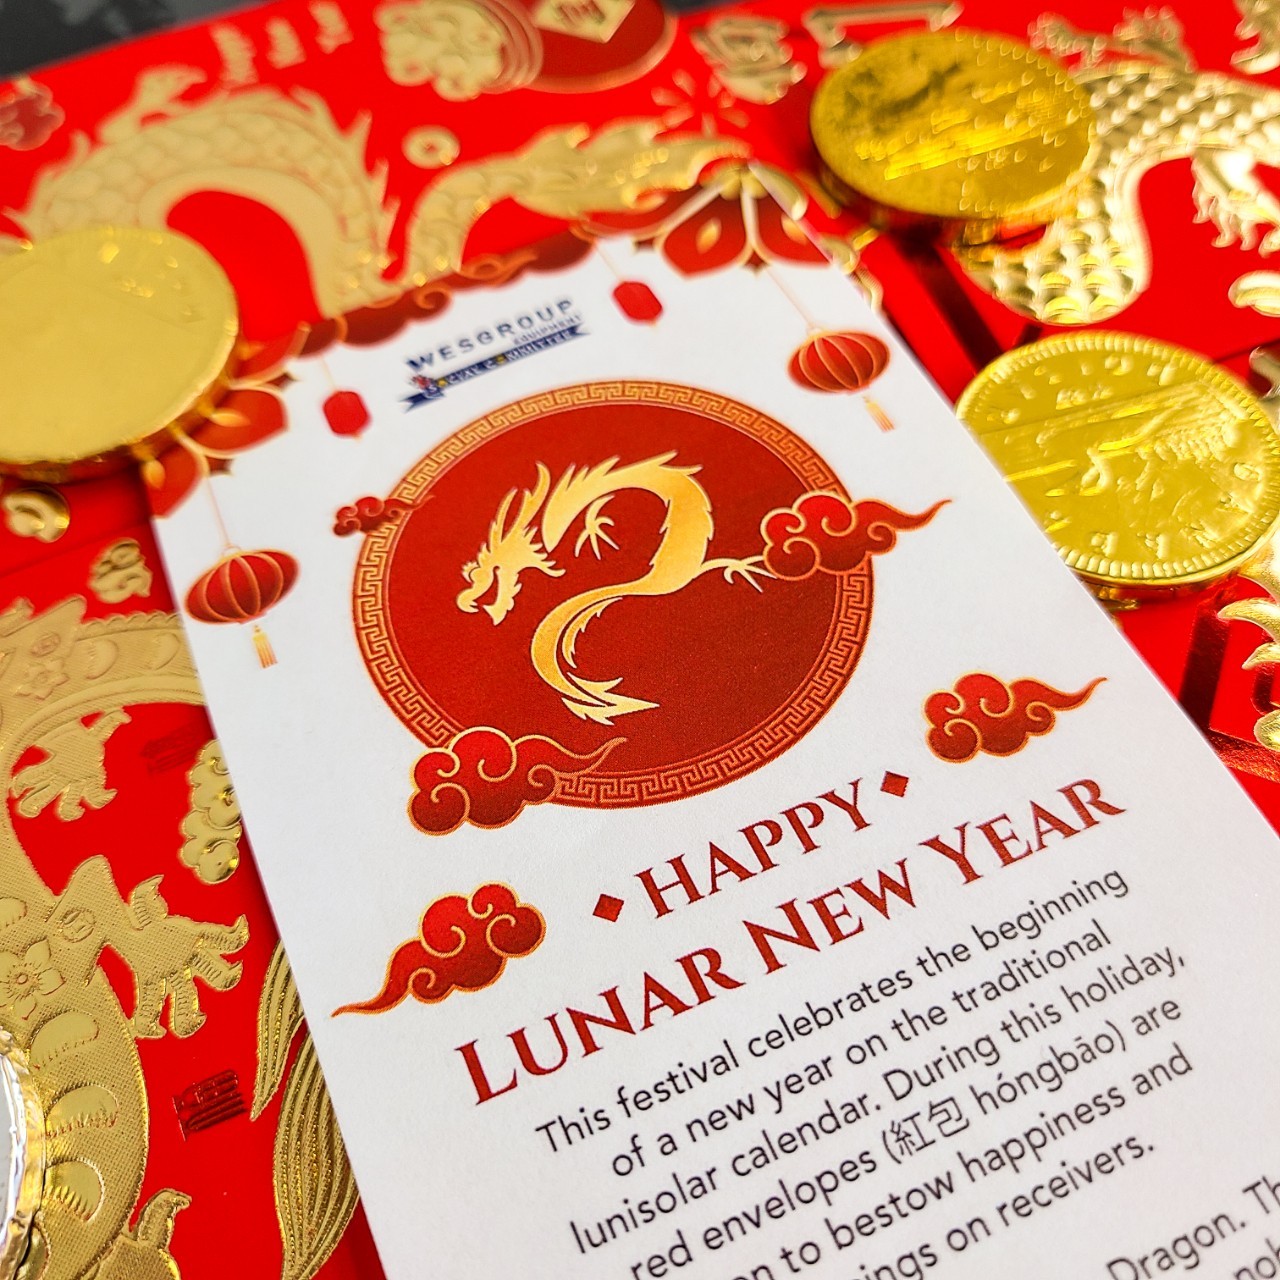 Happy Lunar New Year from Westerra Equipment! 

We're ringing in the Year of the Dragon with red envelopes for all of our team members, filled with chocolate coins. We wish you a year of prosperity, joy, and good fortune!